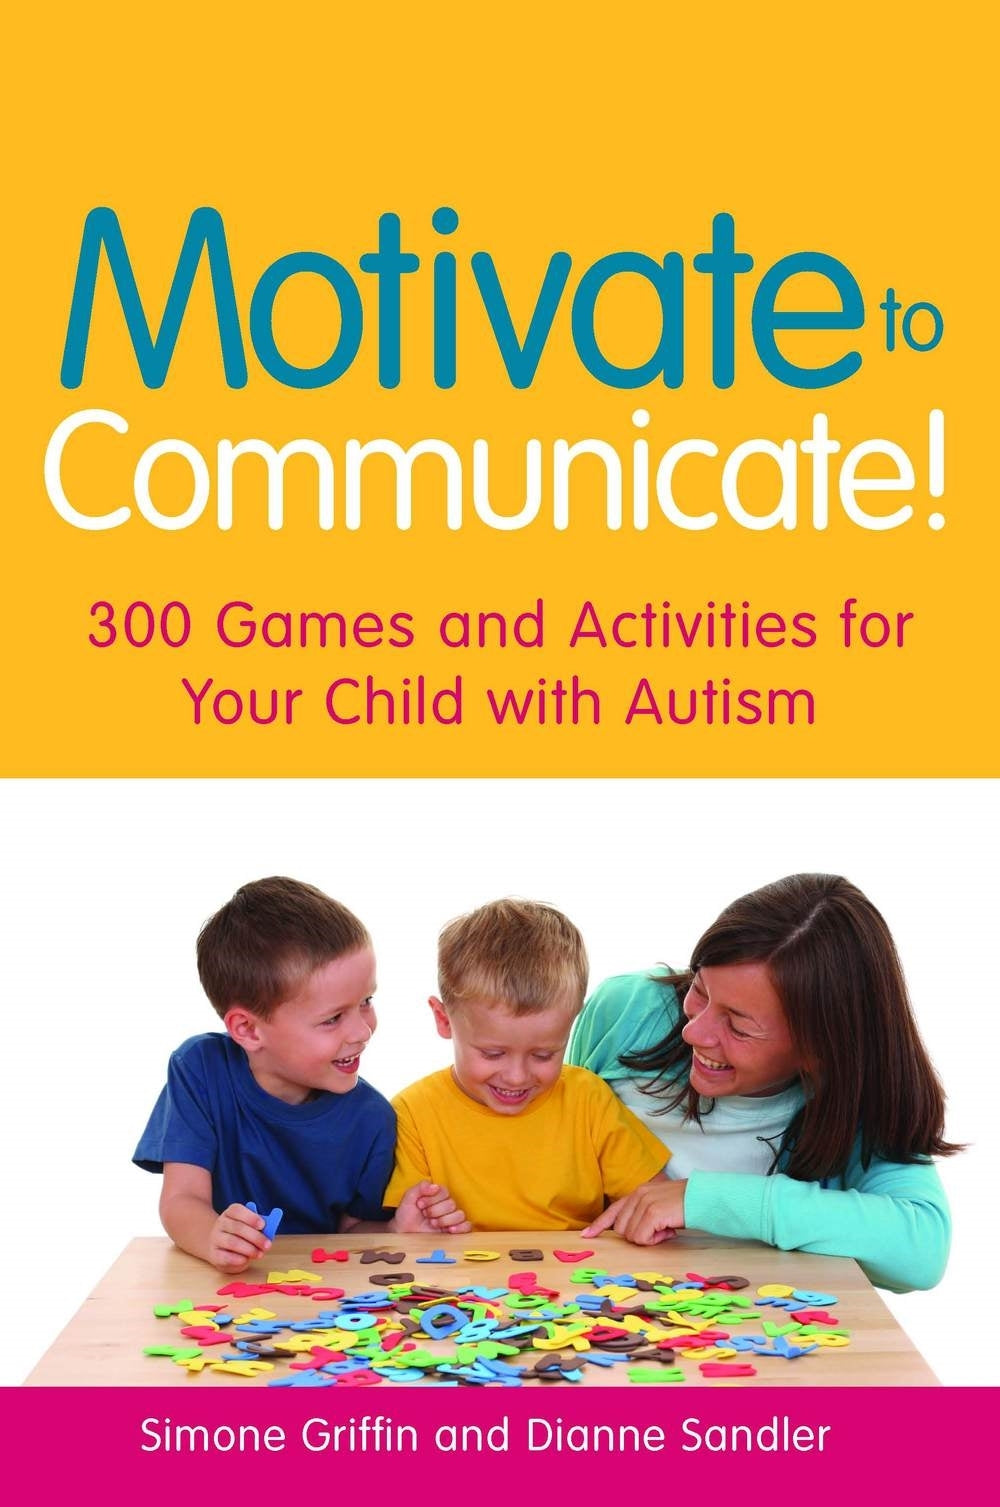 Motivate to Communicate! by Simone Griffin, Dianne Sandler